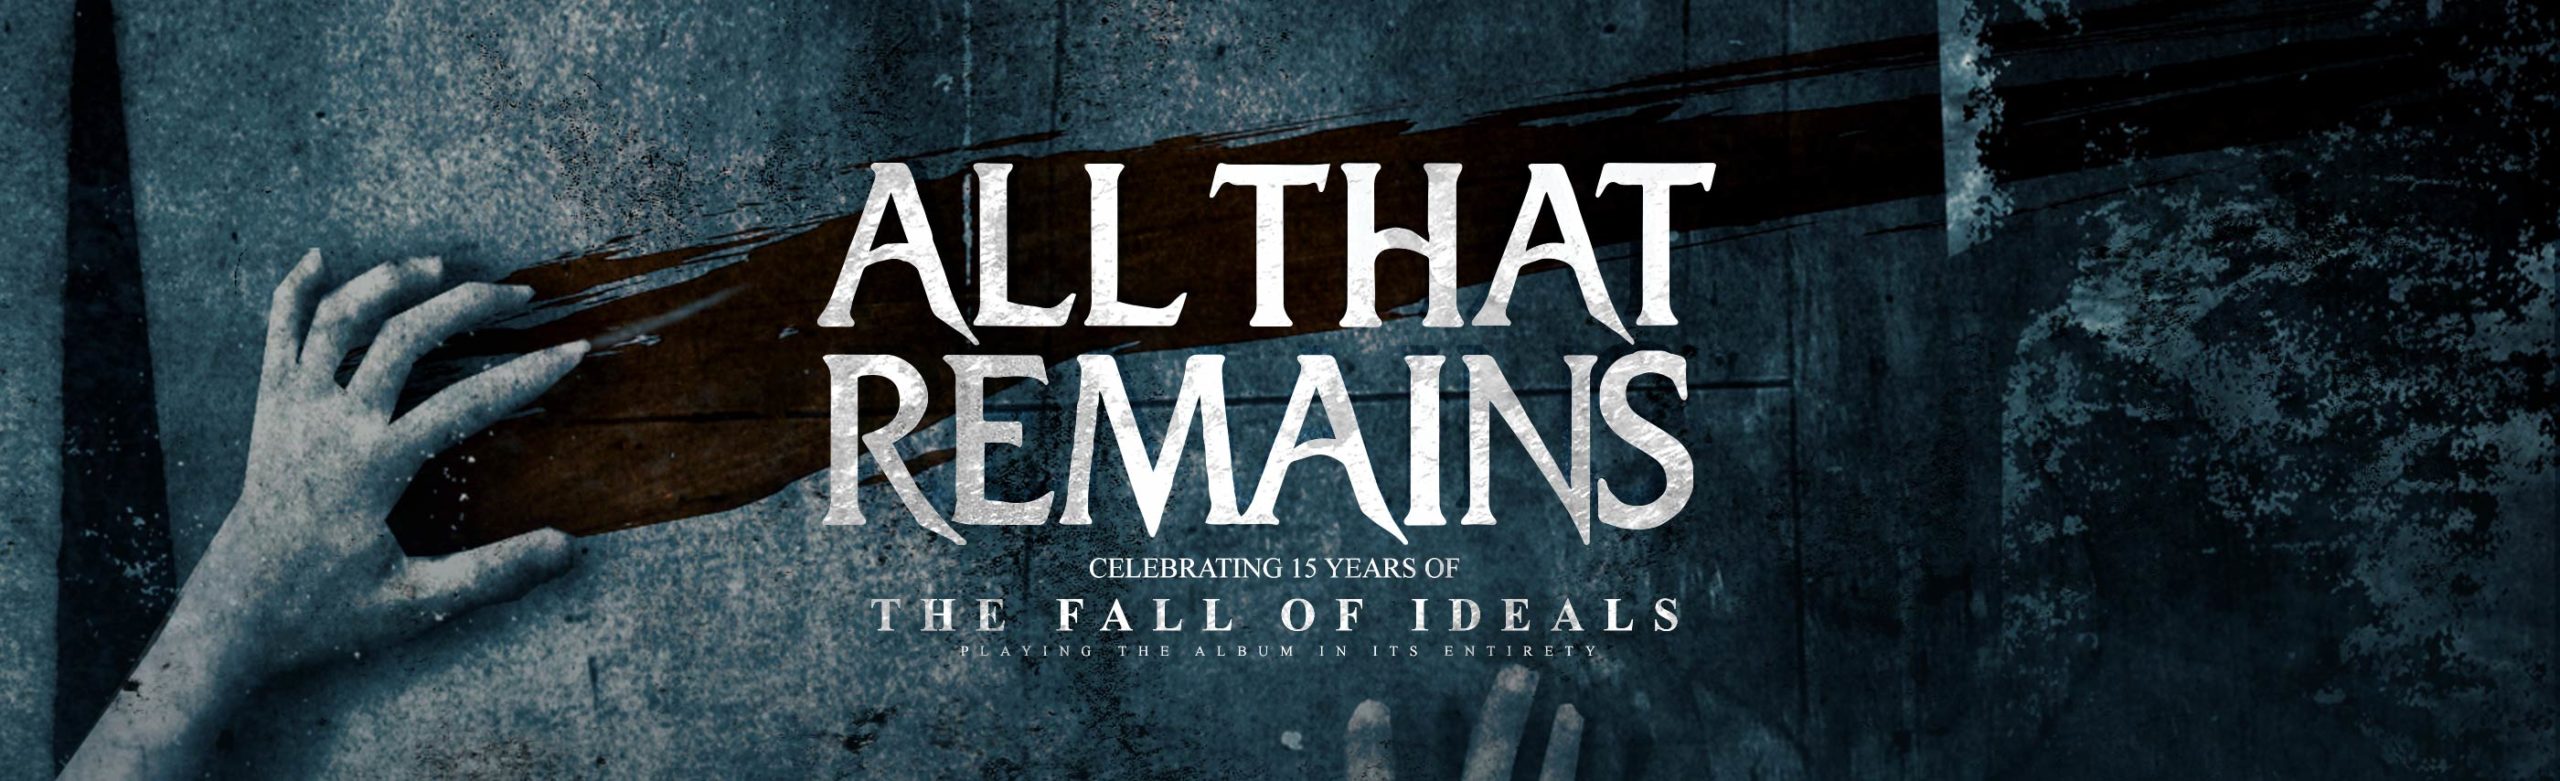 Event Info: All That Remains at The ELM 2022 Image